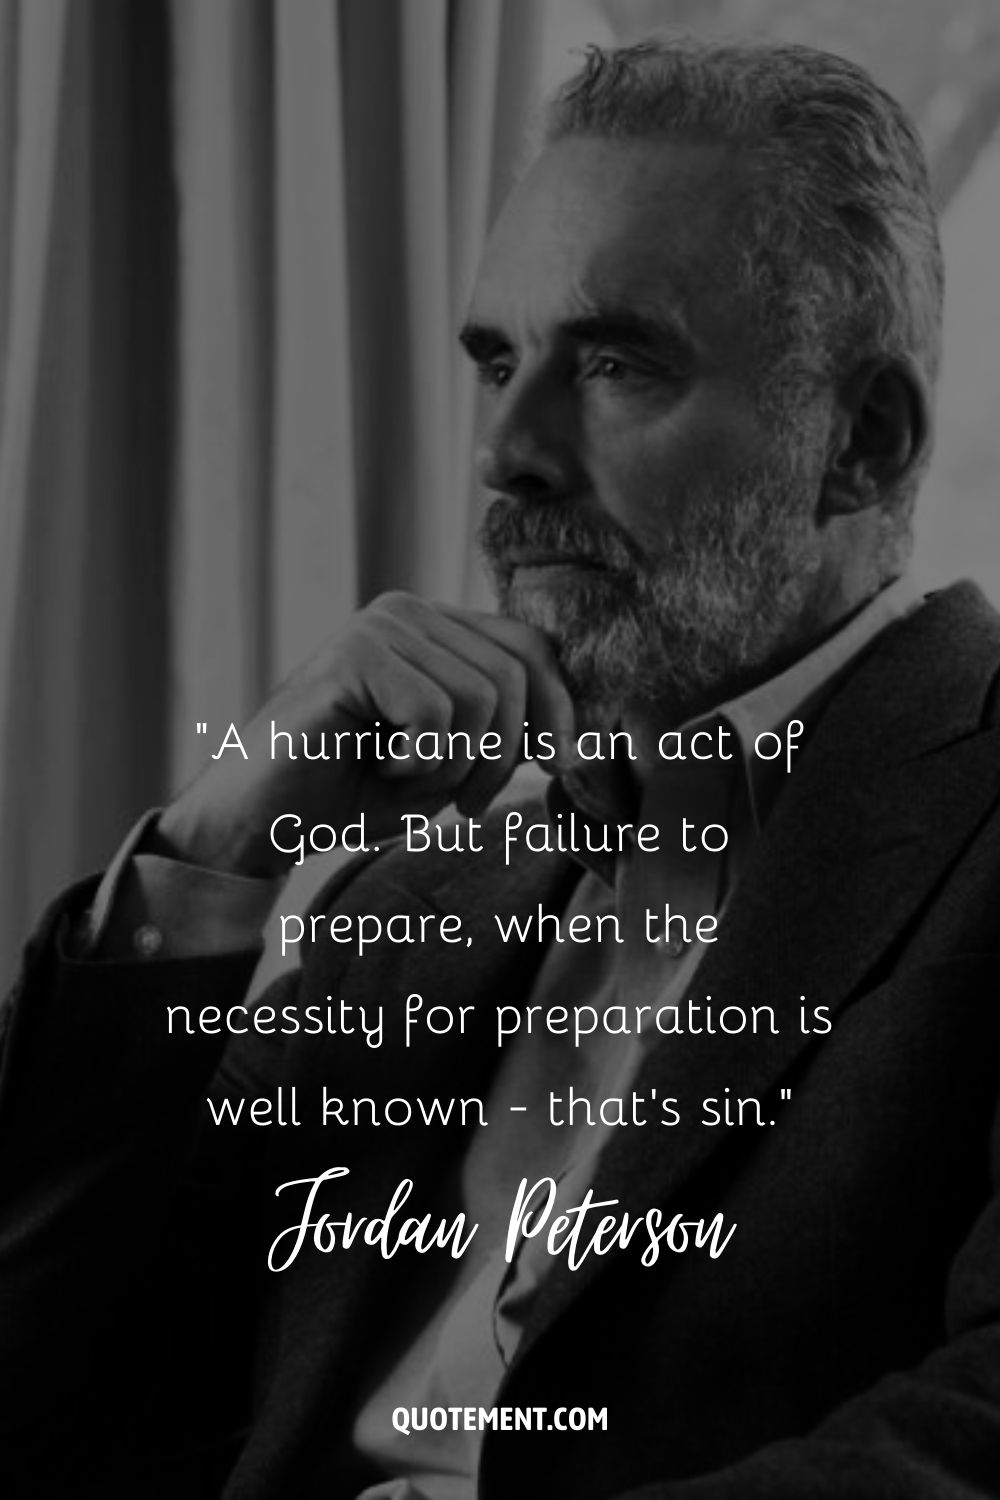 A hurricane is an act of God. But failure to prepare, when the necessity for preparation is well known - that’s sin